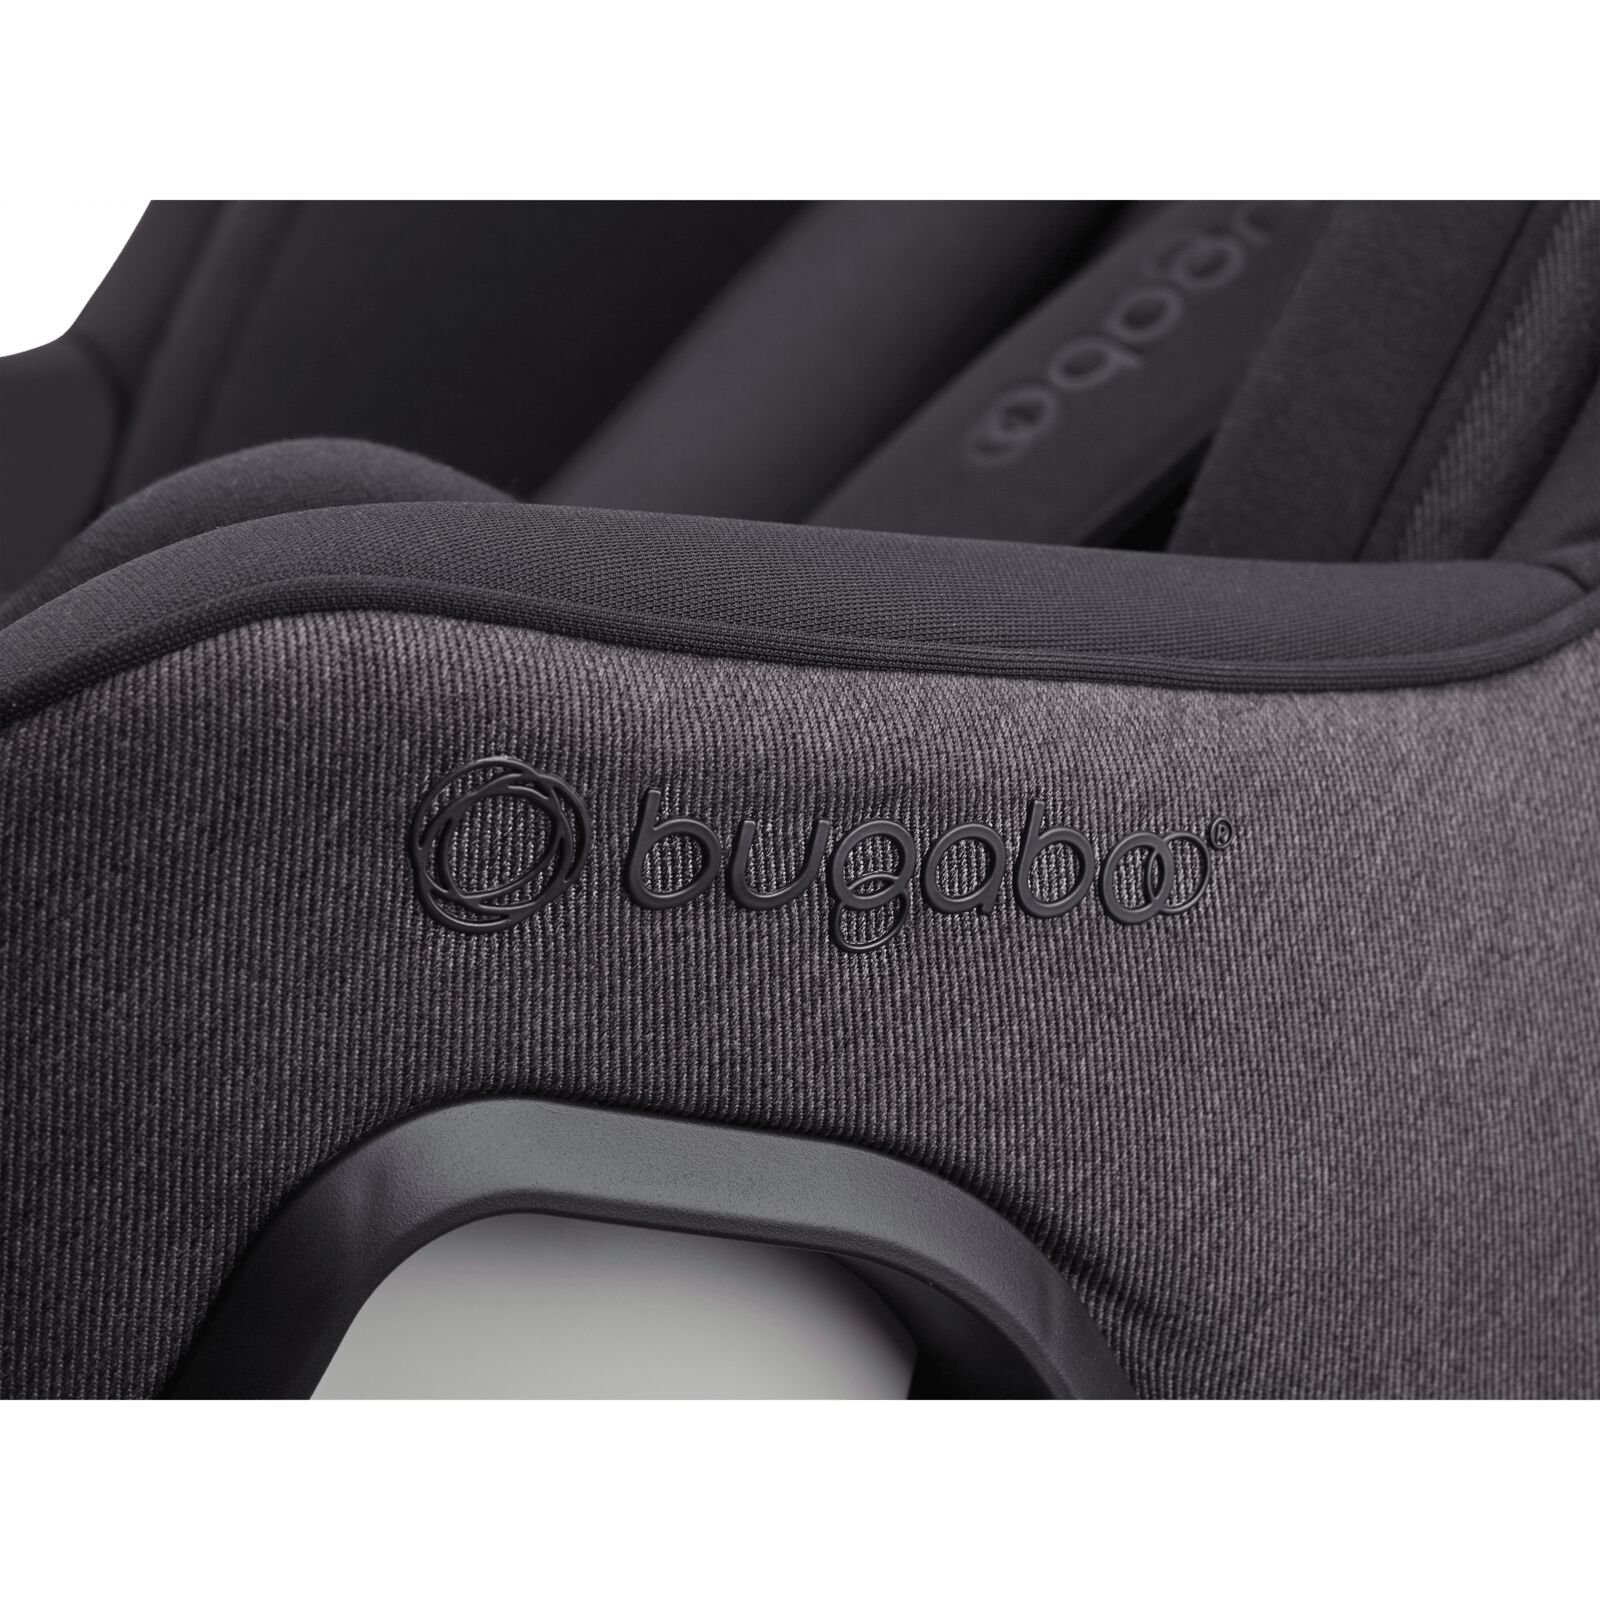 Close up of the embossed Bugaboo logo on the Bugaboo Owl by Nuna car seat in black fabrics.